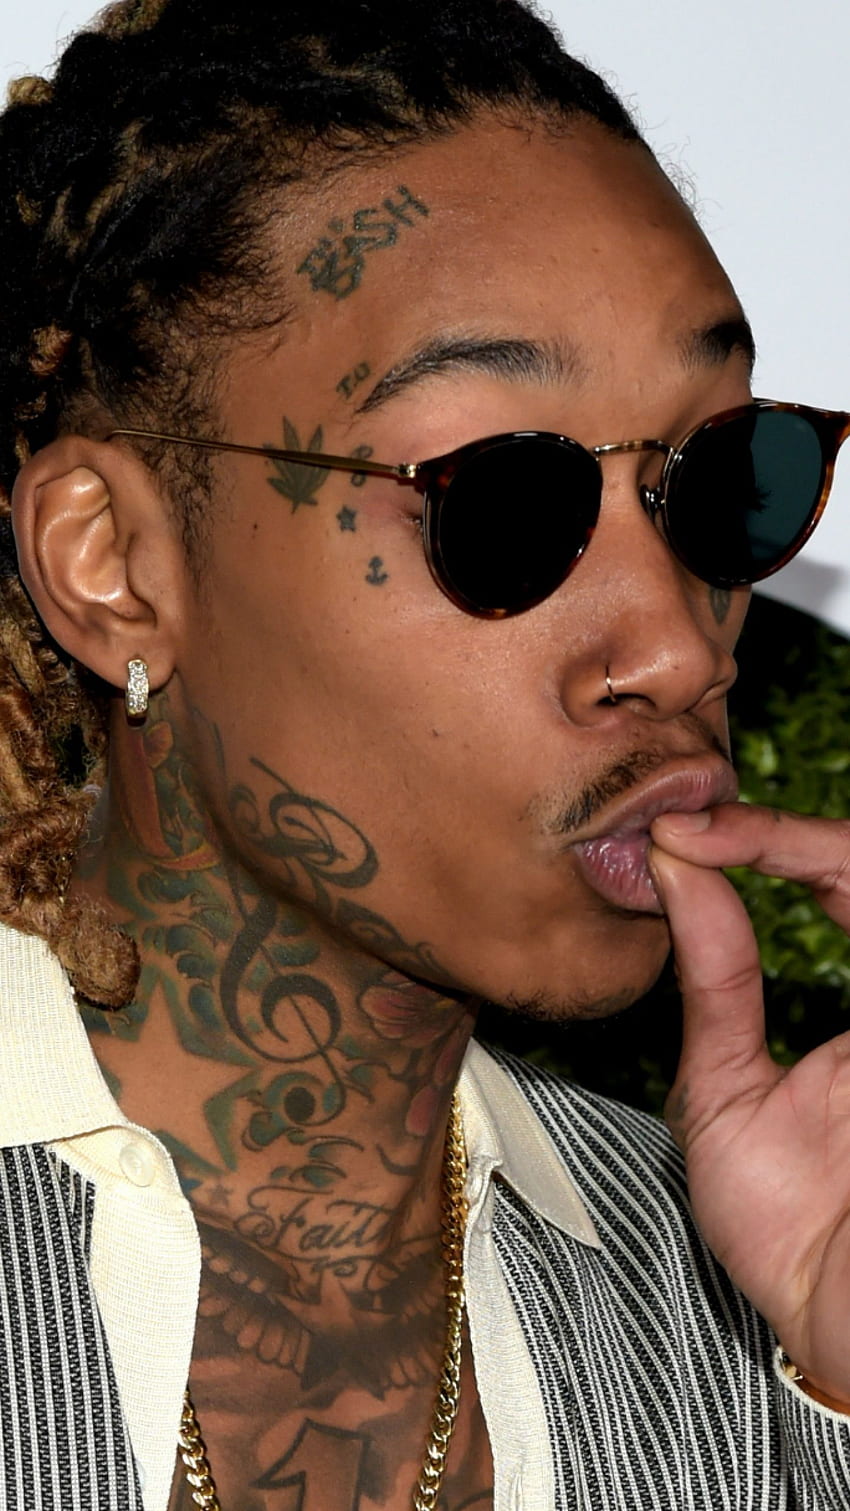 Amber Rose Gets Wiz Khalifas Stoned Face Tattooed on Her Arm